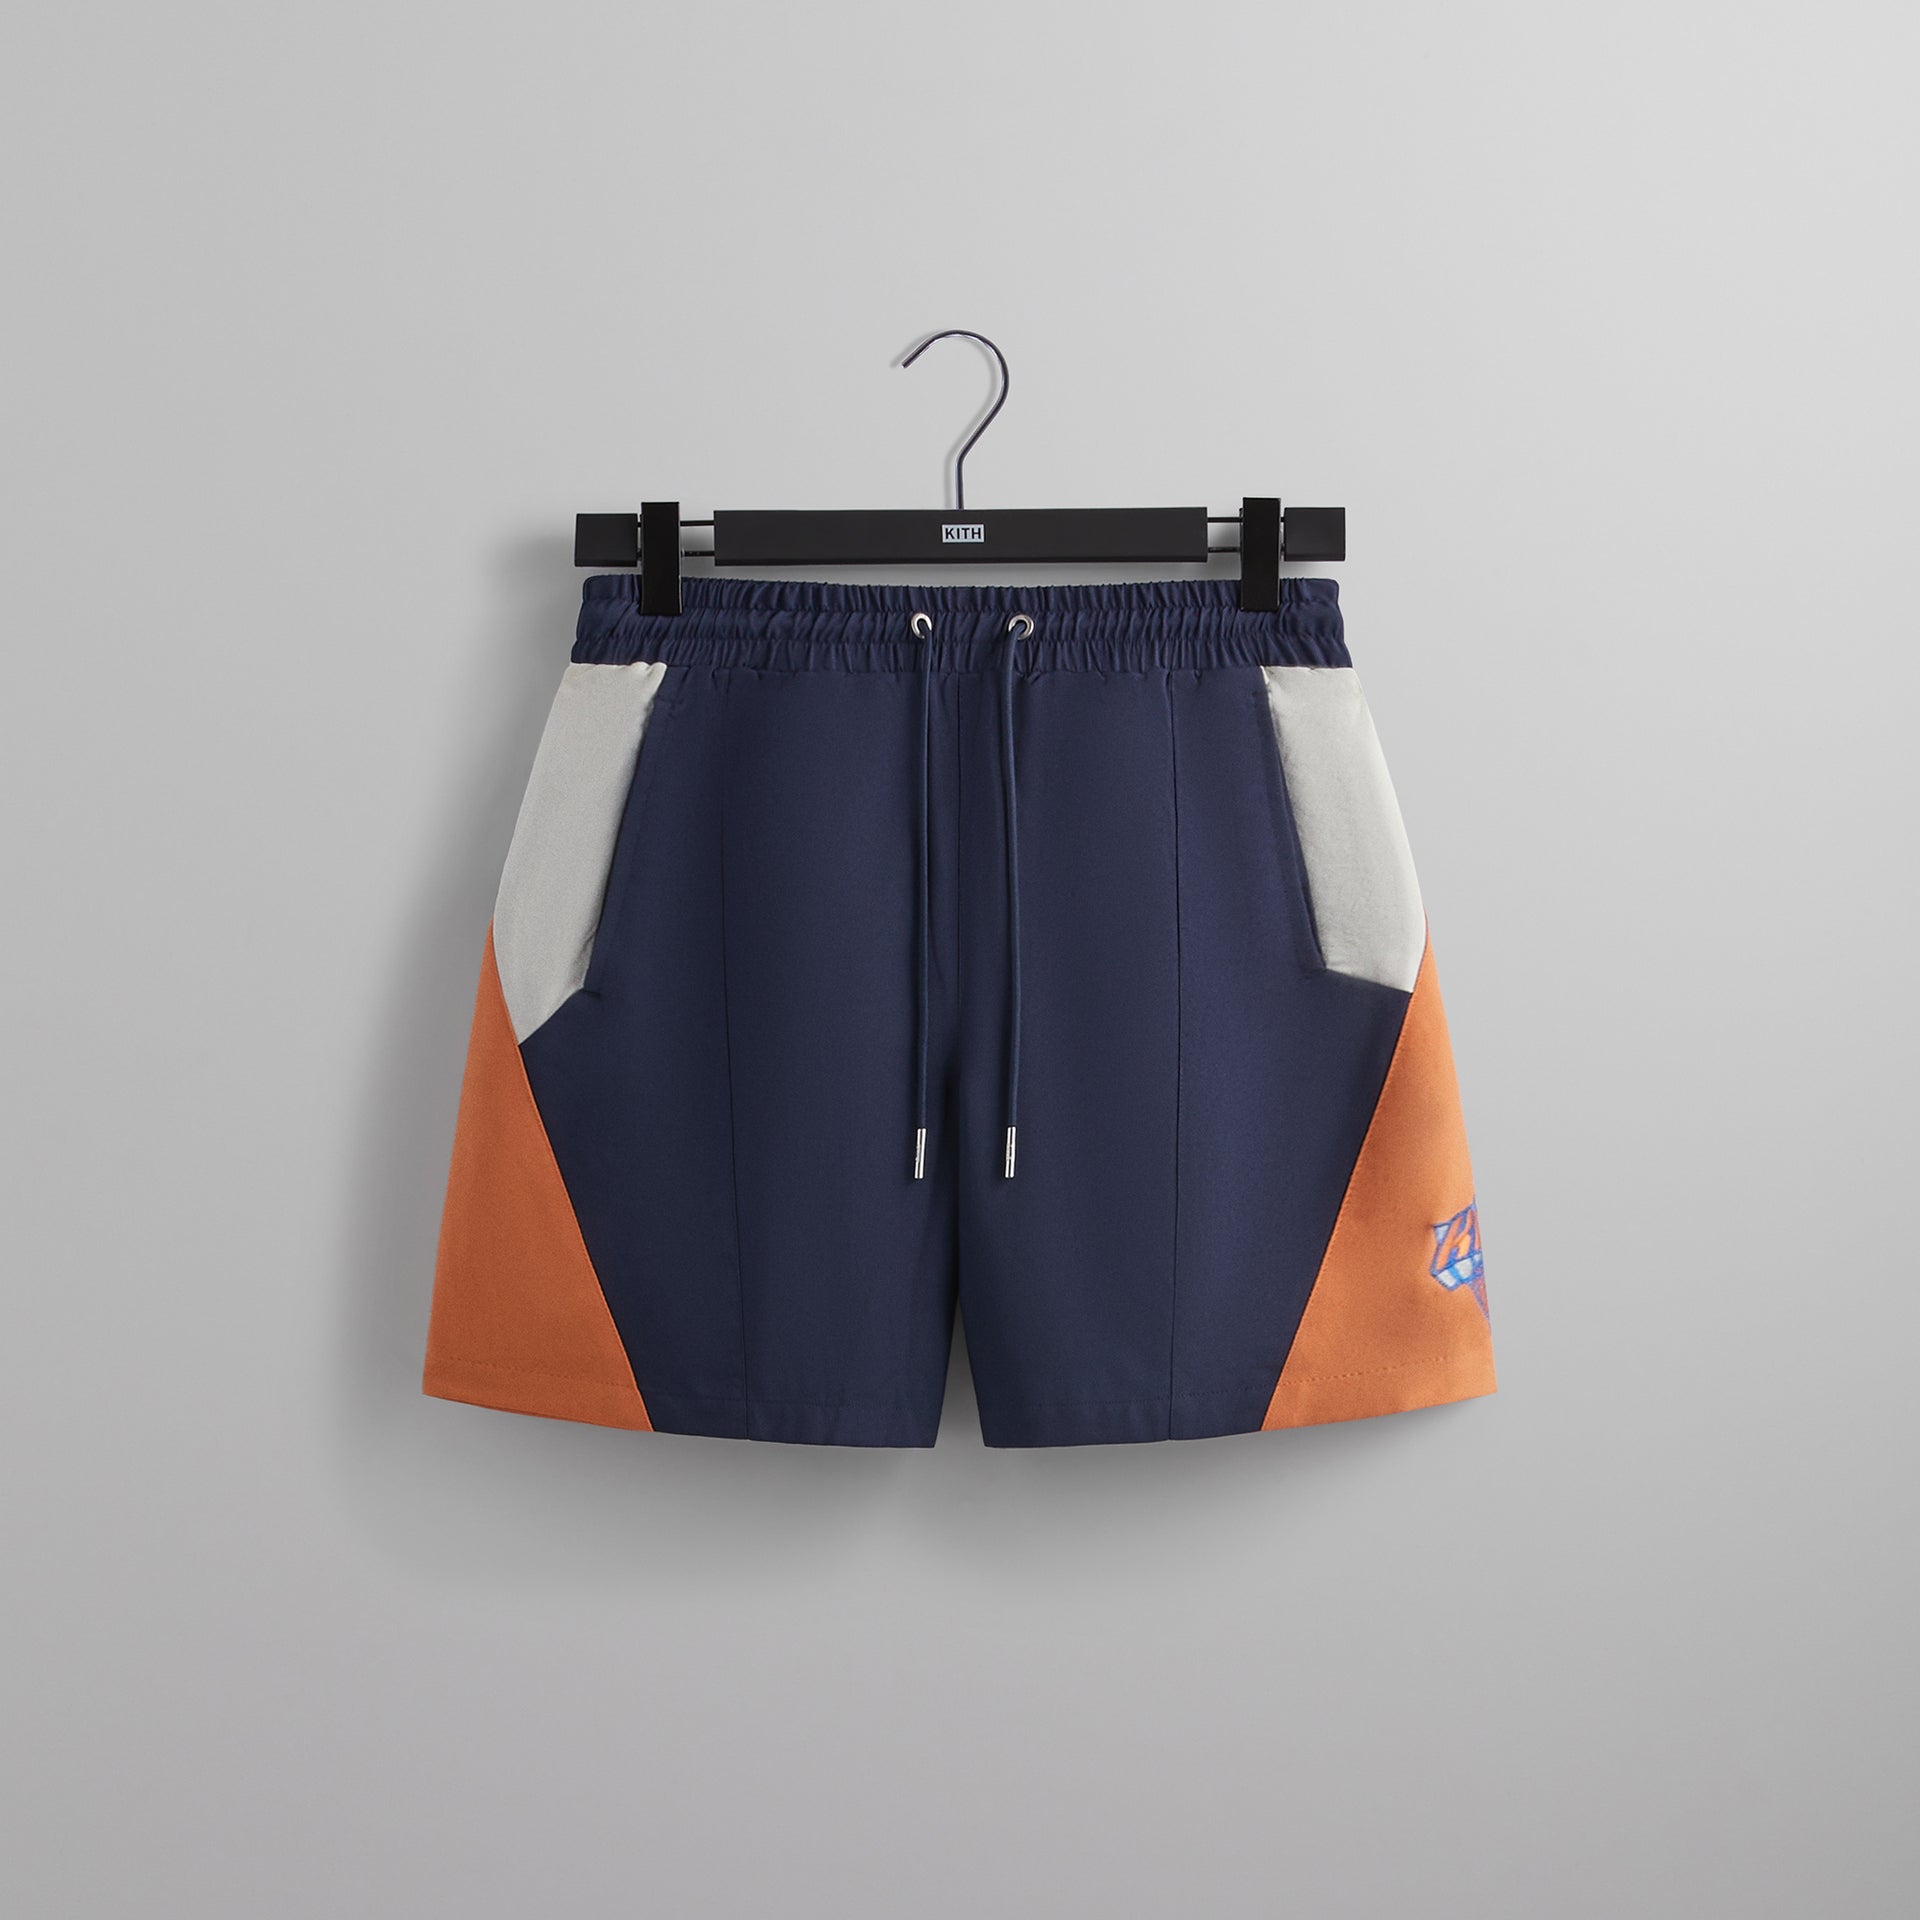 Erlebniswelt-fliegenfischenShops for the New York Knicks Color-Blocked Shorts from - Nocturnal